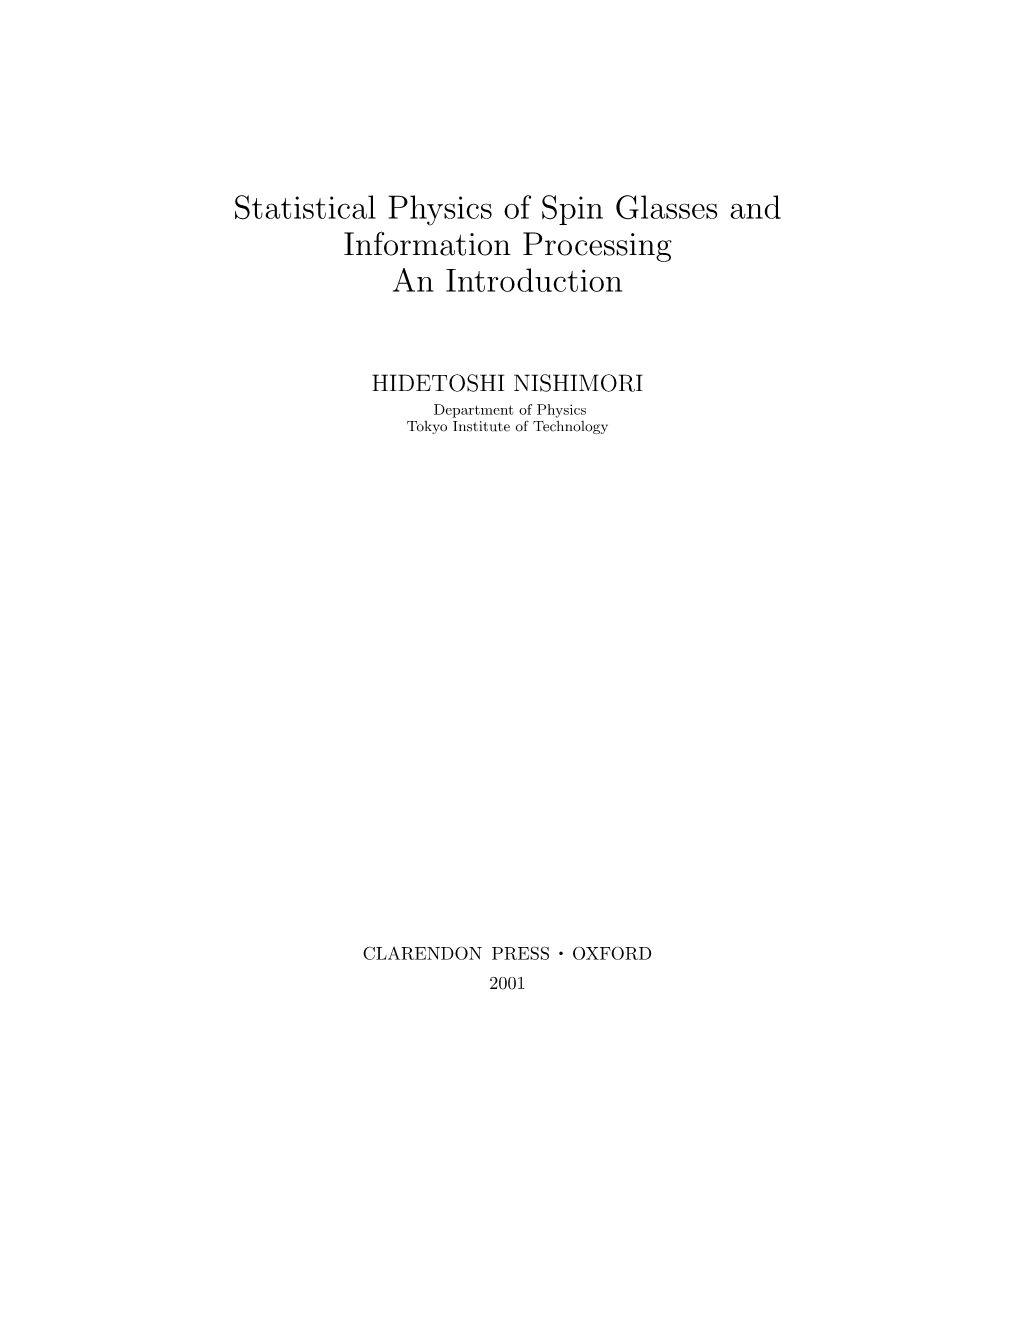 Statistical Physics of Spin Glasses and Information Processing an Introduction